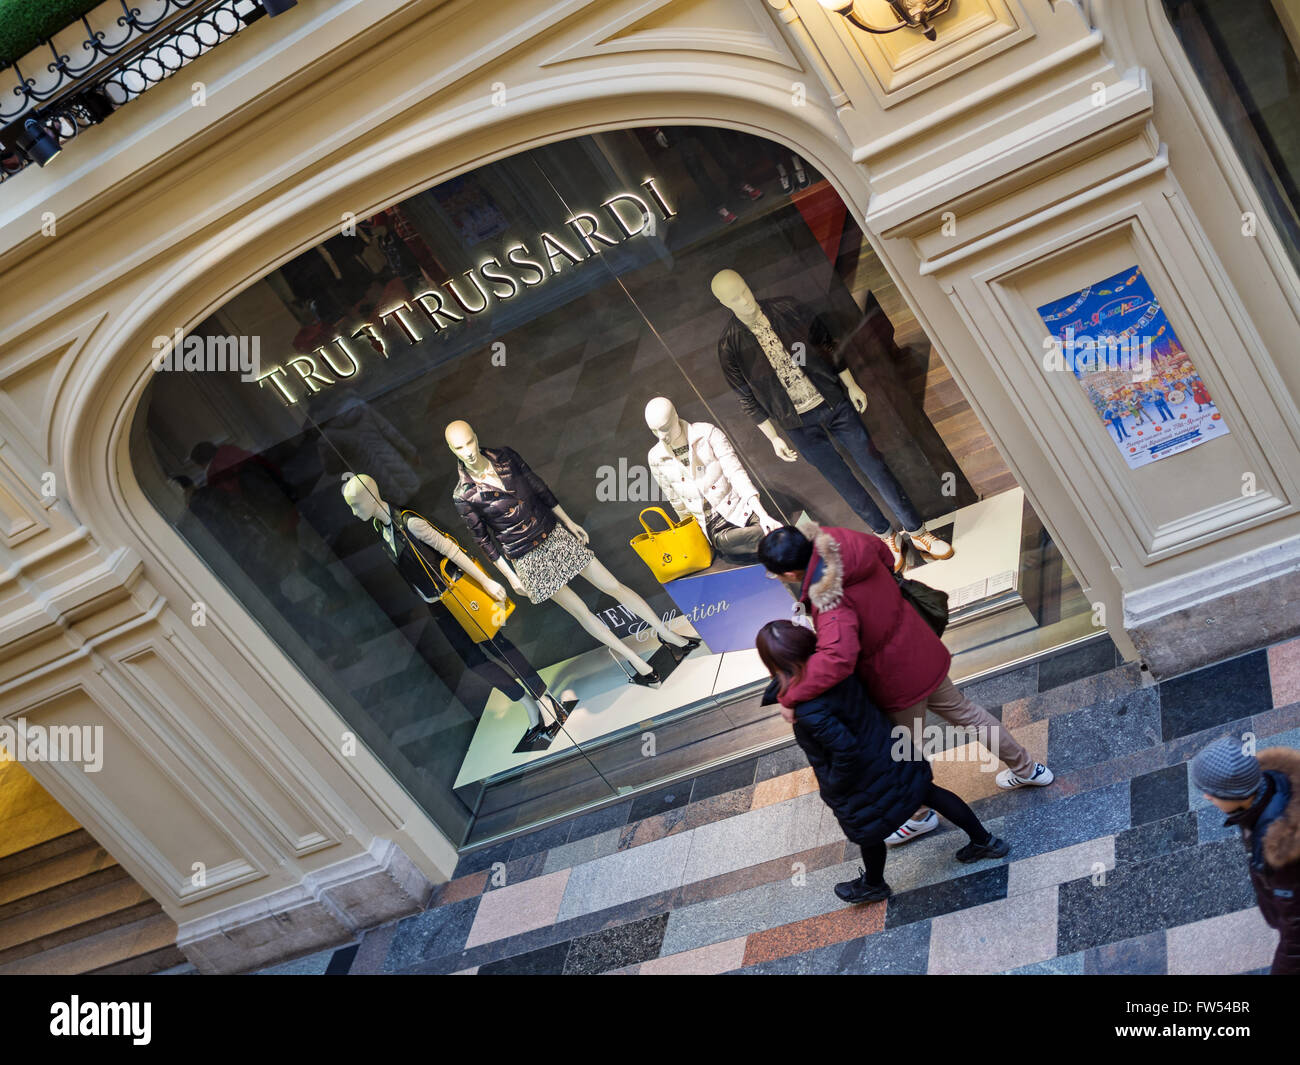 Red Square, Moscow, Russia - February 21, 2016: Chinese tourists pass near TRU Trussardi boutique showcases at the GUM Departmen Stock Photo